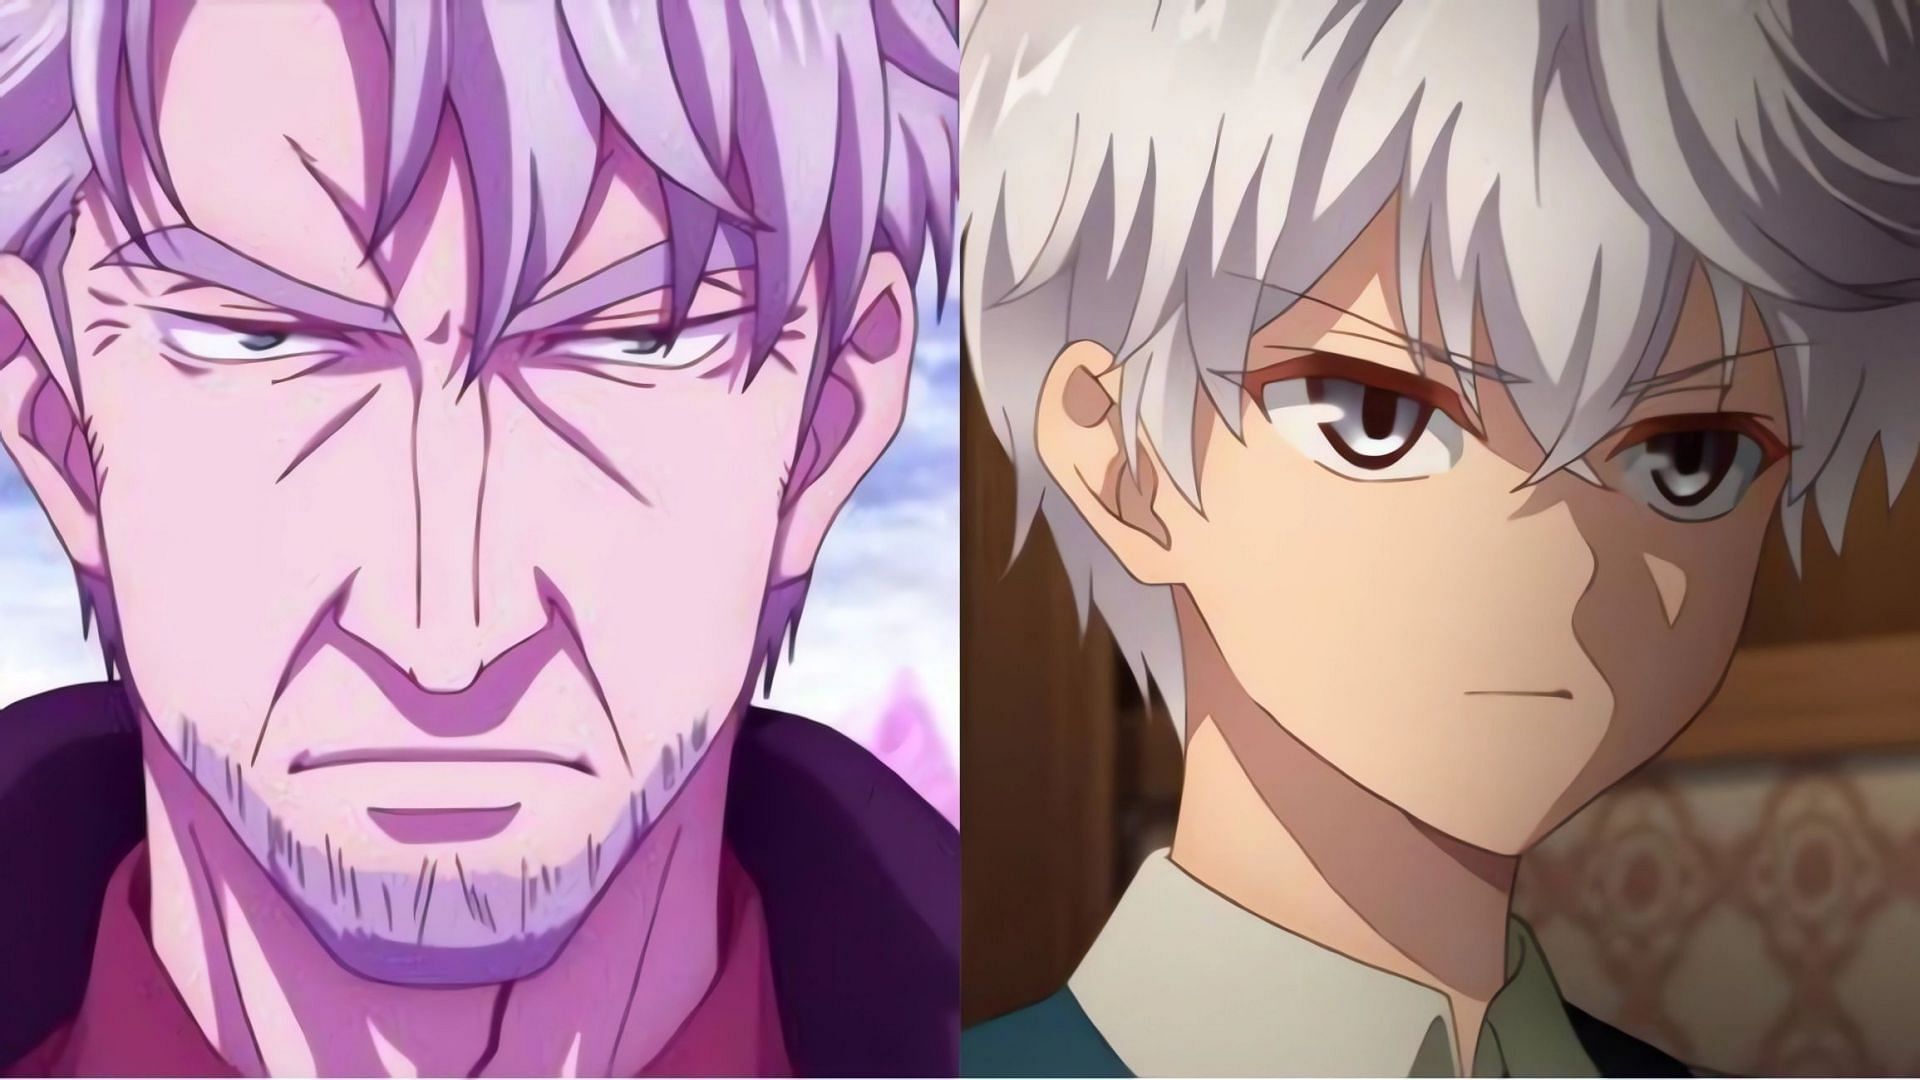 Lugh as seen in his previous life (left) and new life (right) (Image via SILVER LINK &amp; Palette)